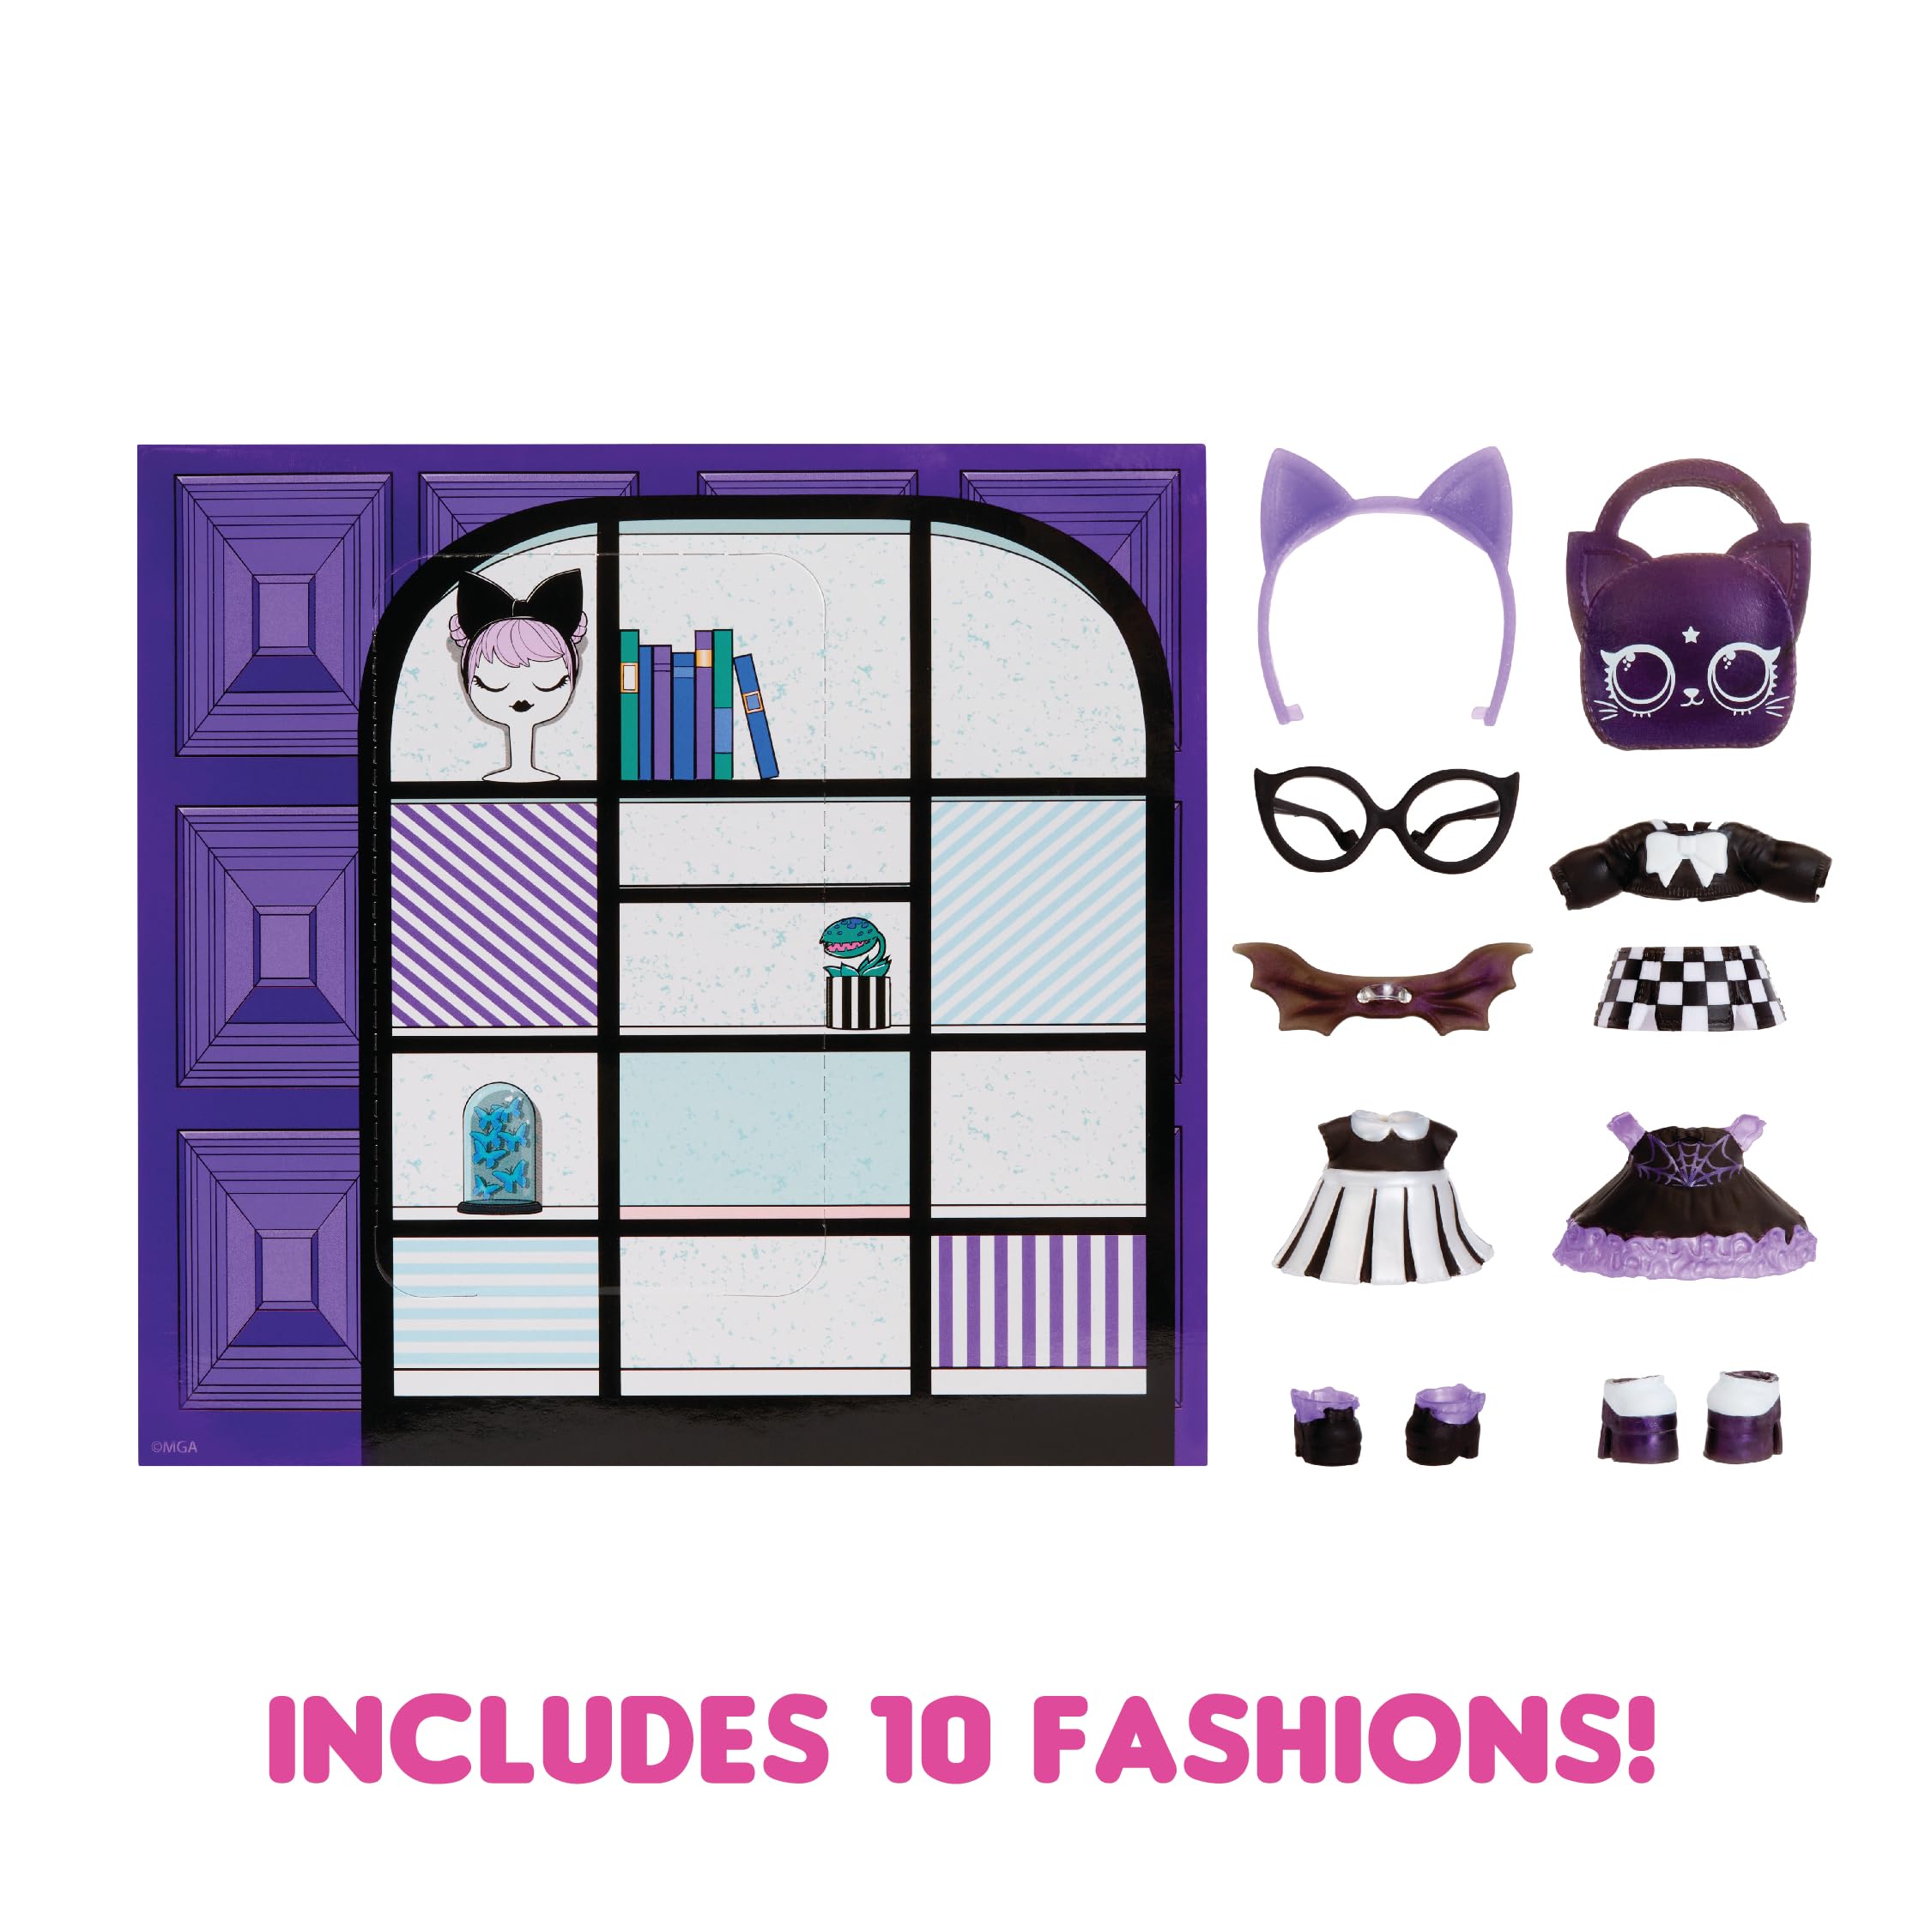 LOL Surprise Fashion Packs Costume Style - 6 Unique Styles Each with (3) Outfits, (2) Pairs of Shoes, (4) Accessories – Mix and Match Styles to Create Tons of New Looks - Great Gift for Girls Age 4+